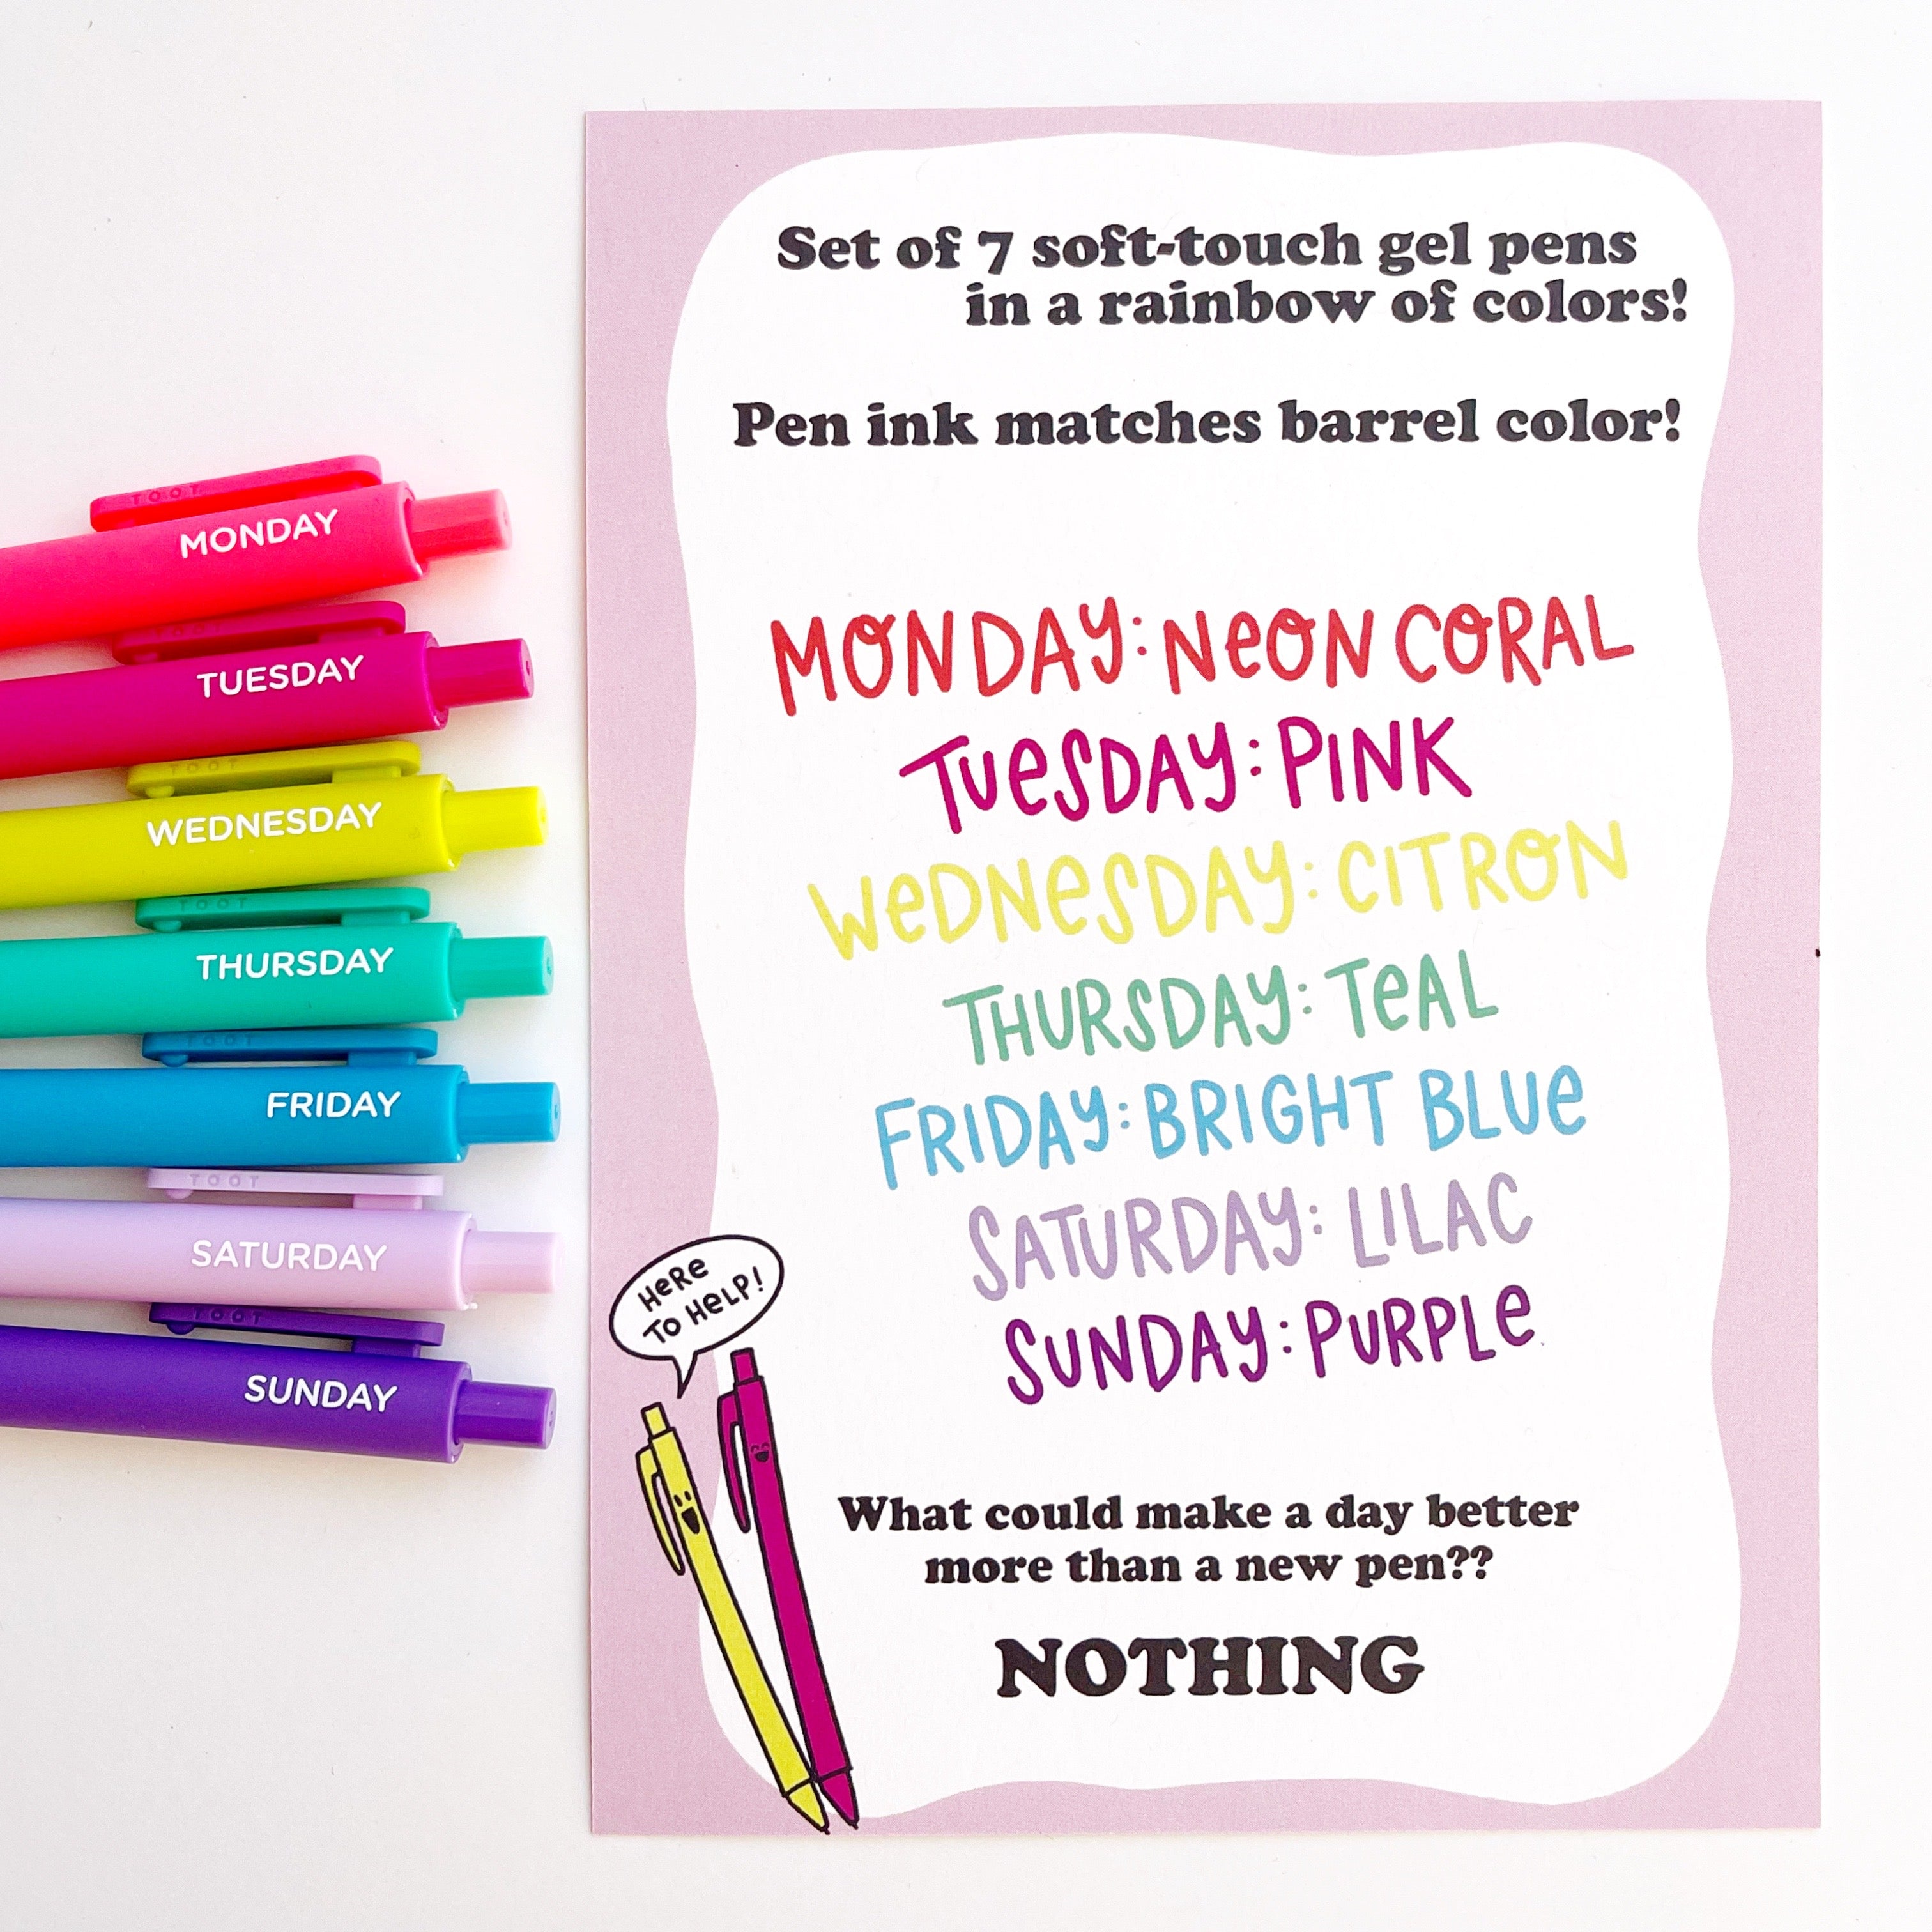 Image of package of pens in rainbow colors with white text says, "Monday, Tuesday, Wednesday, Thursday, Friday, Saturday, Sunday.".